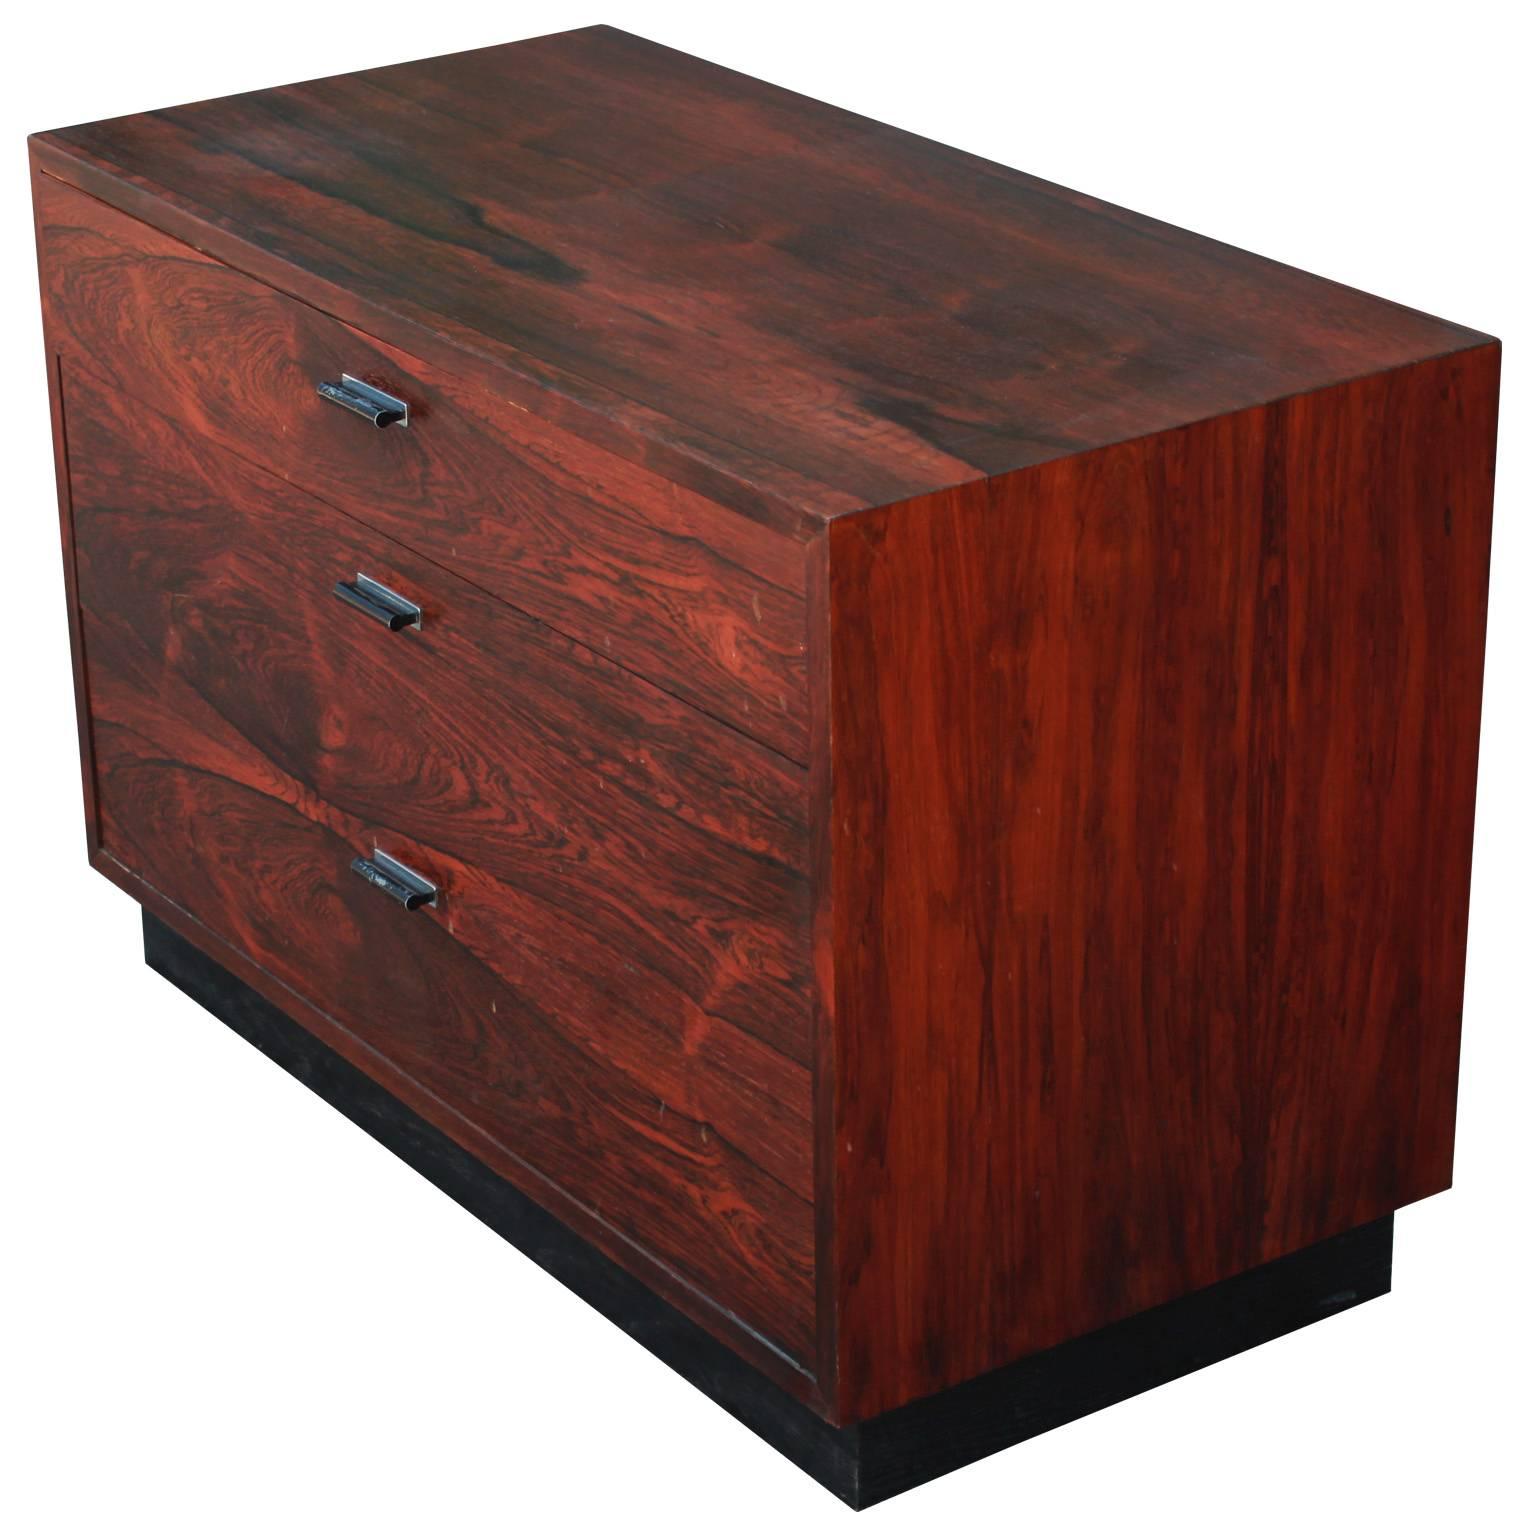 Excellent small-scale chest or side table designed by Harvey Probber. Rosewood has a dramatic matched grain and is truly stunning in person. Chest rests on a slightly inset black lacquered base. Black lacquered metal hardware has an excellent patina.